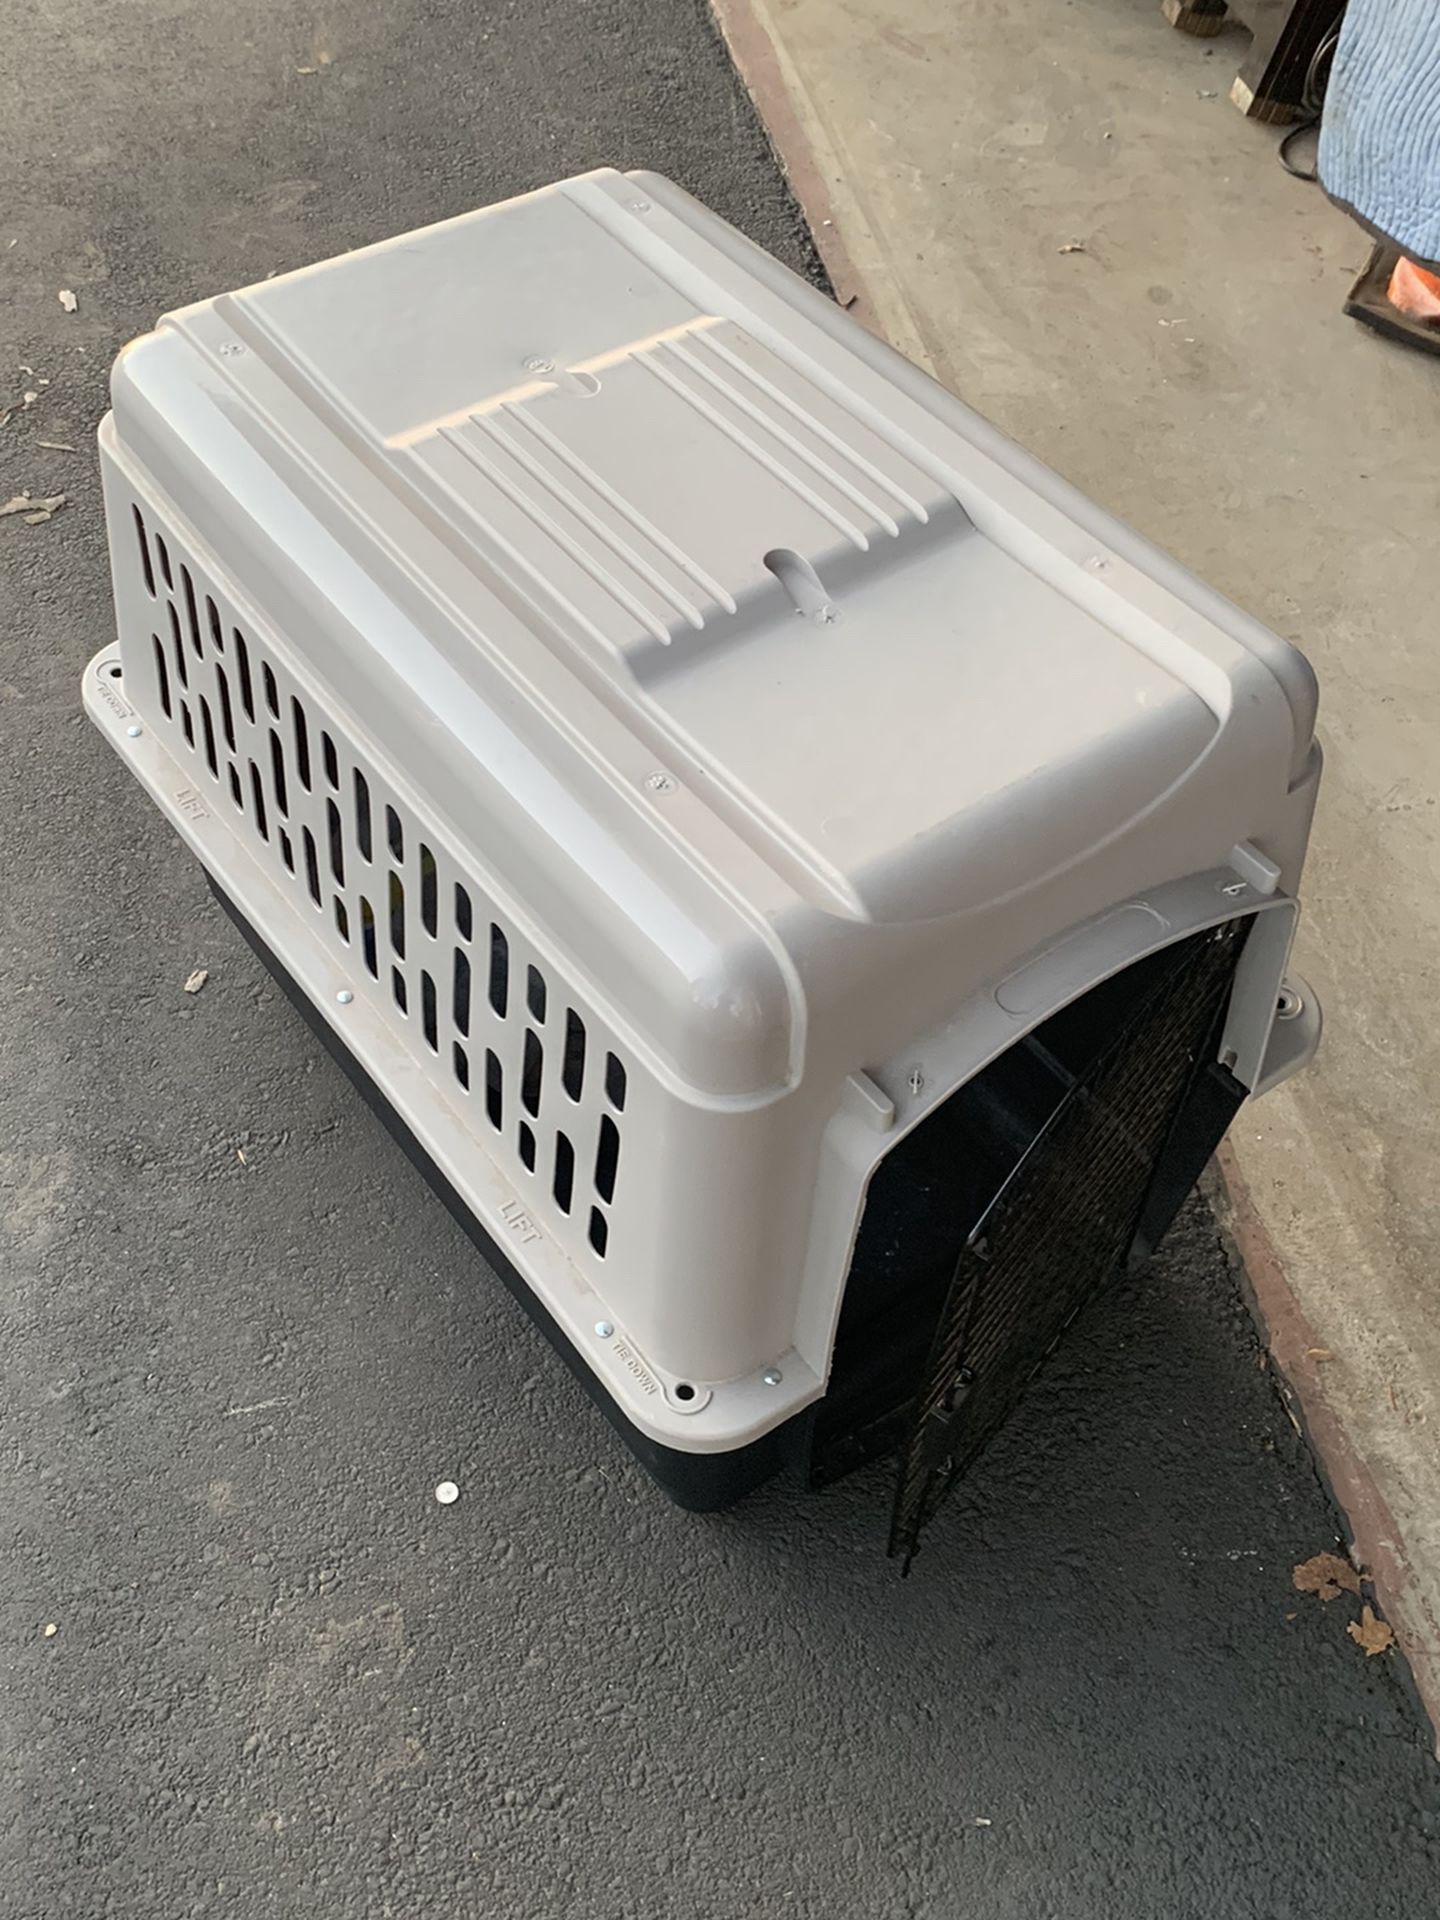 Dog Kennel Brand New Used Once